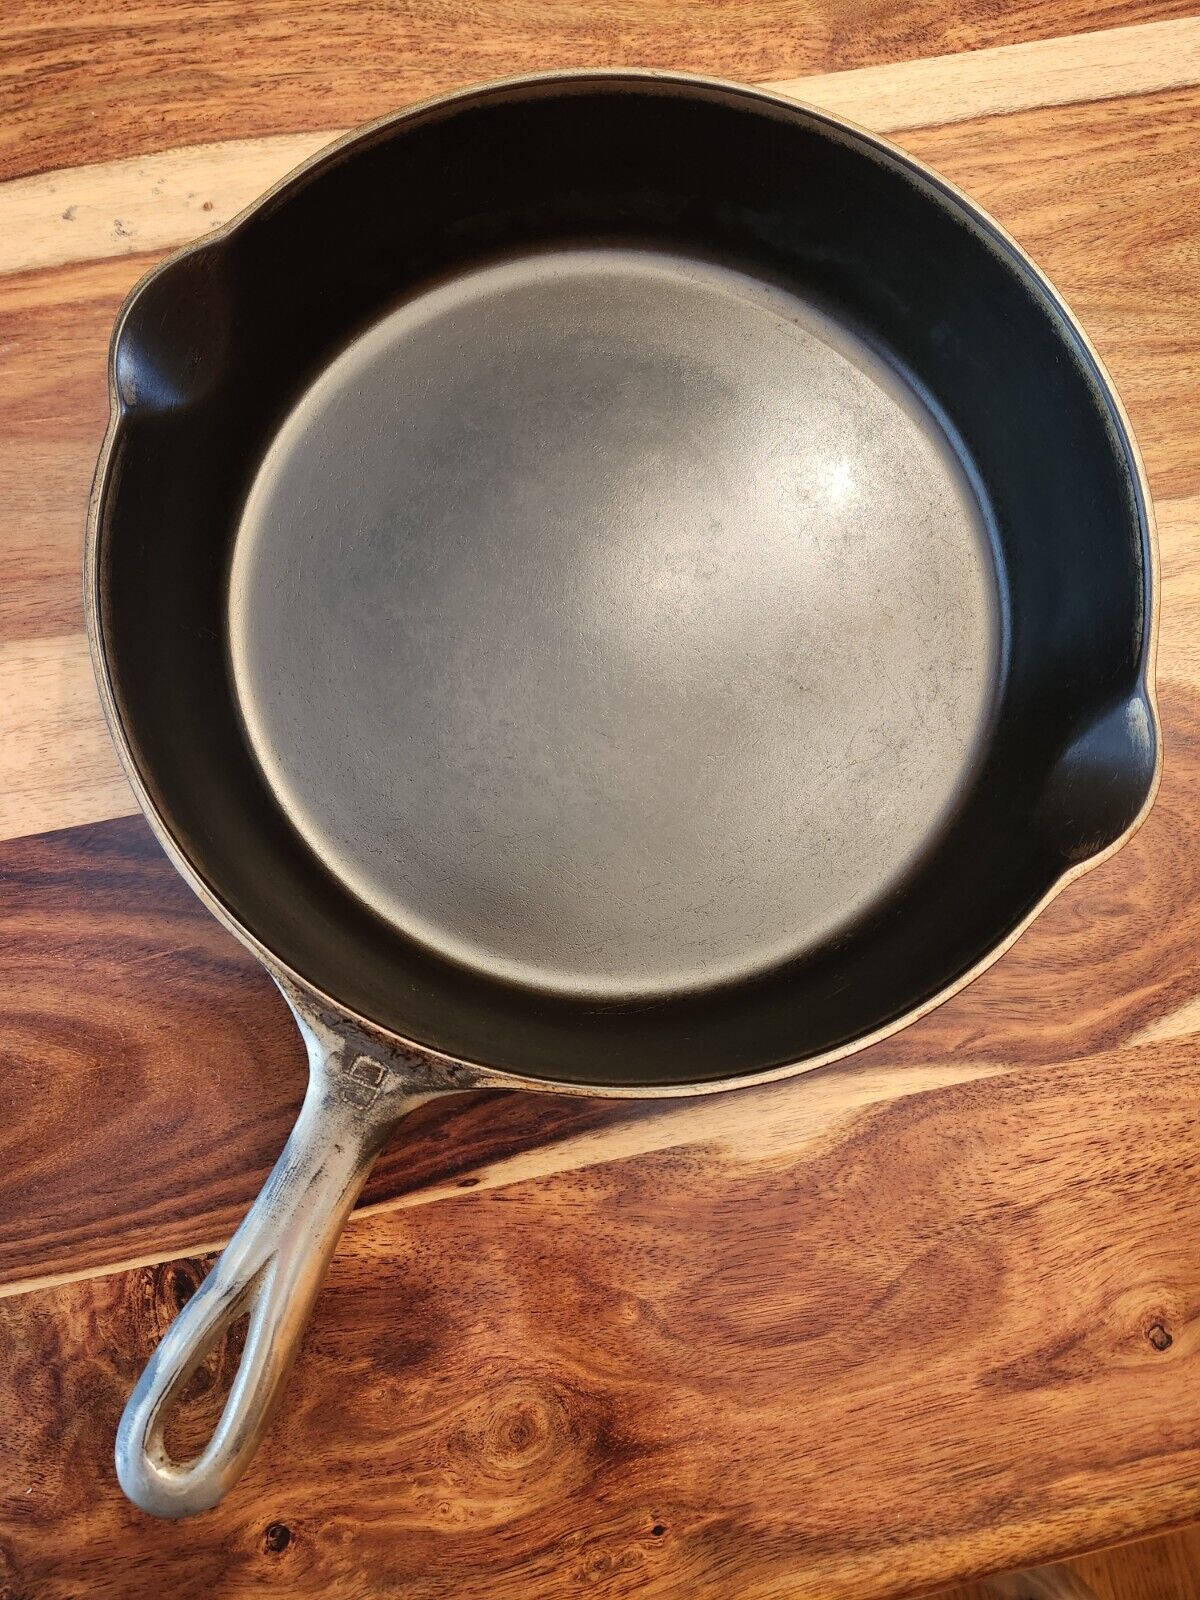 Griswold No. 9 Cast Iron Skillet, Plated, Large Block Logo, 710, Fully Restored